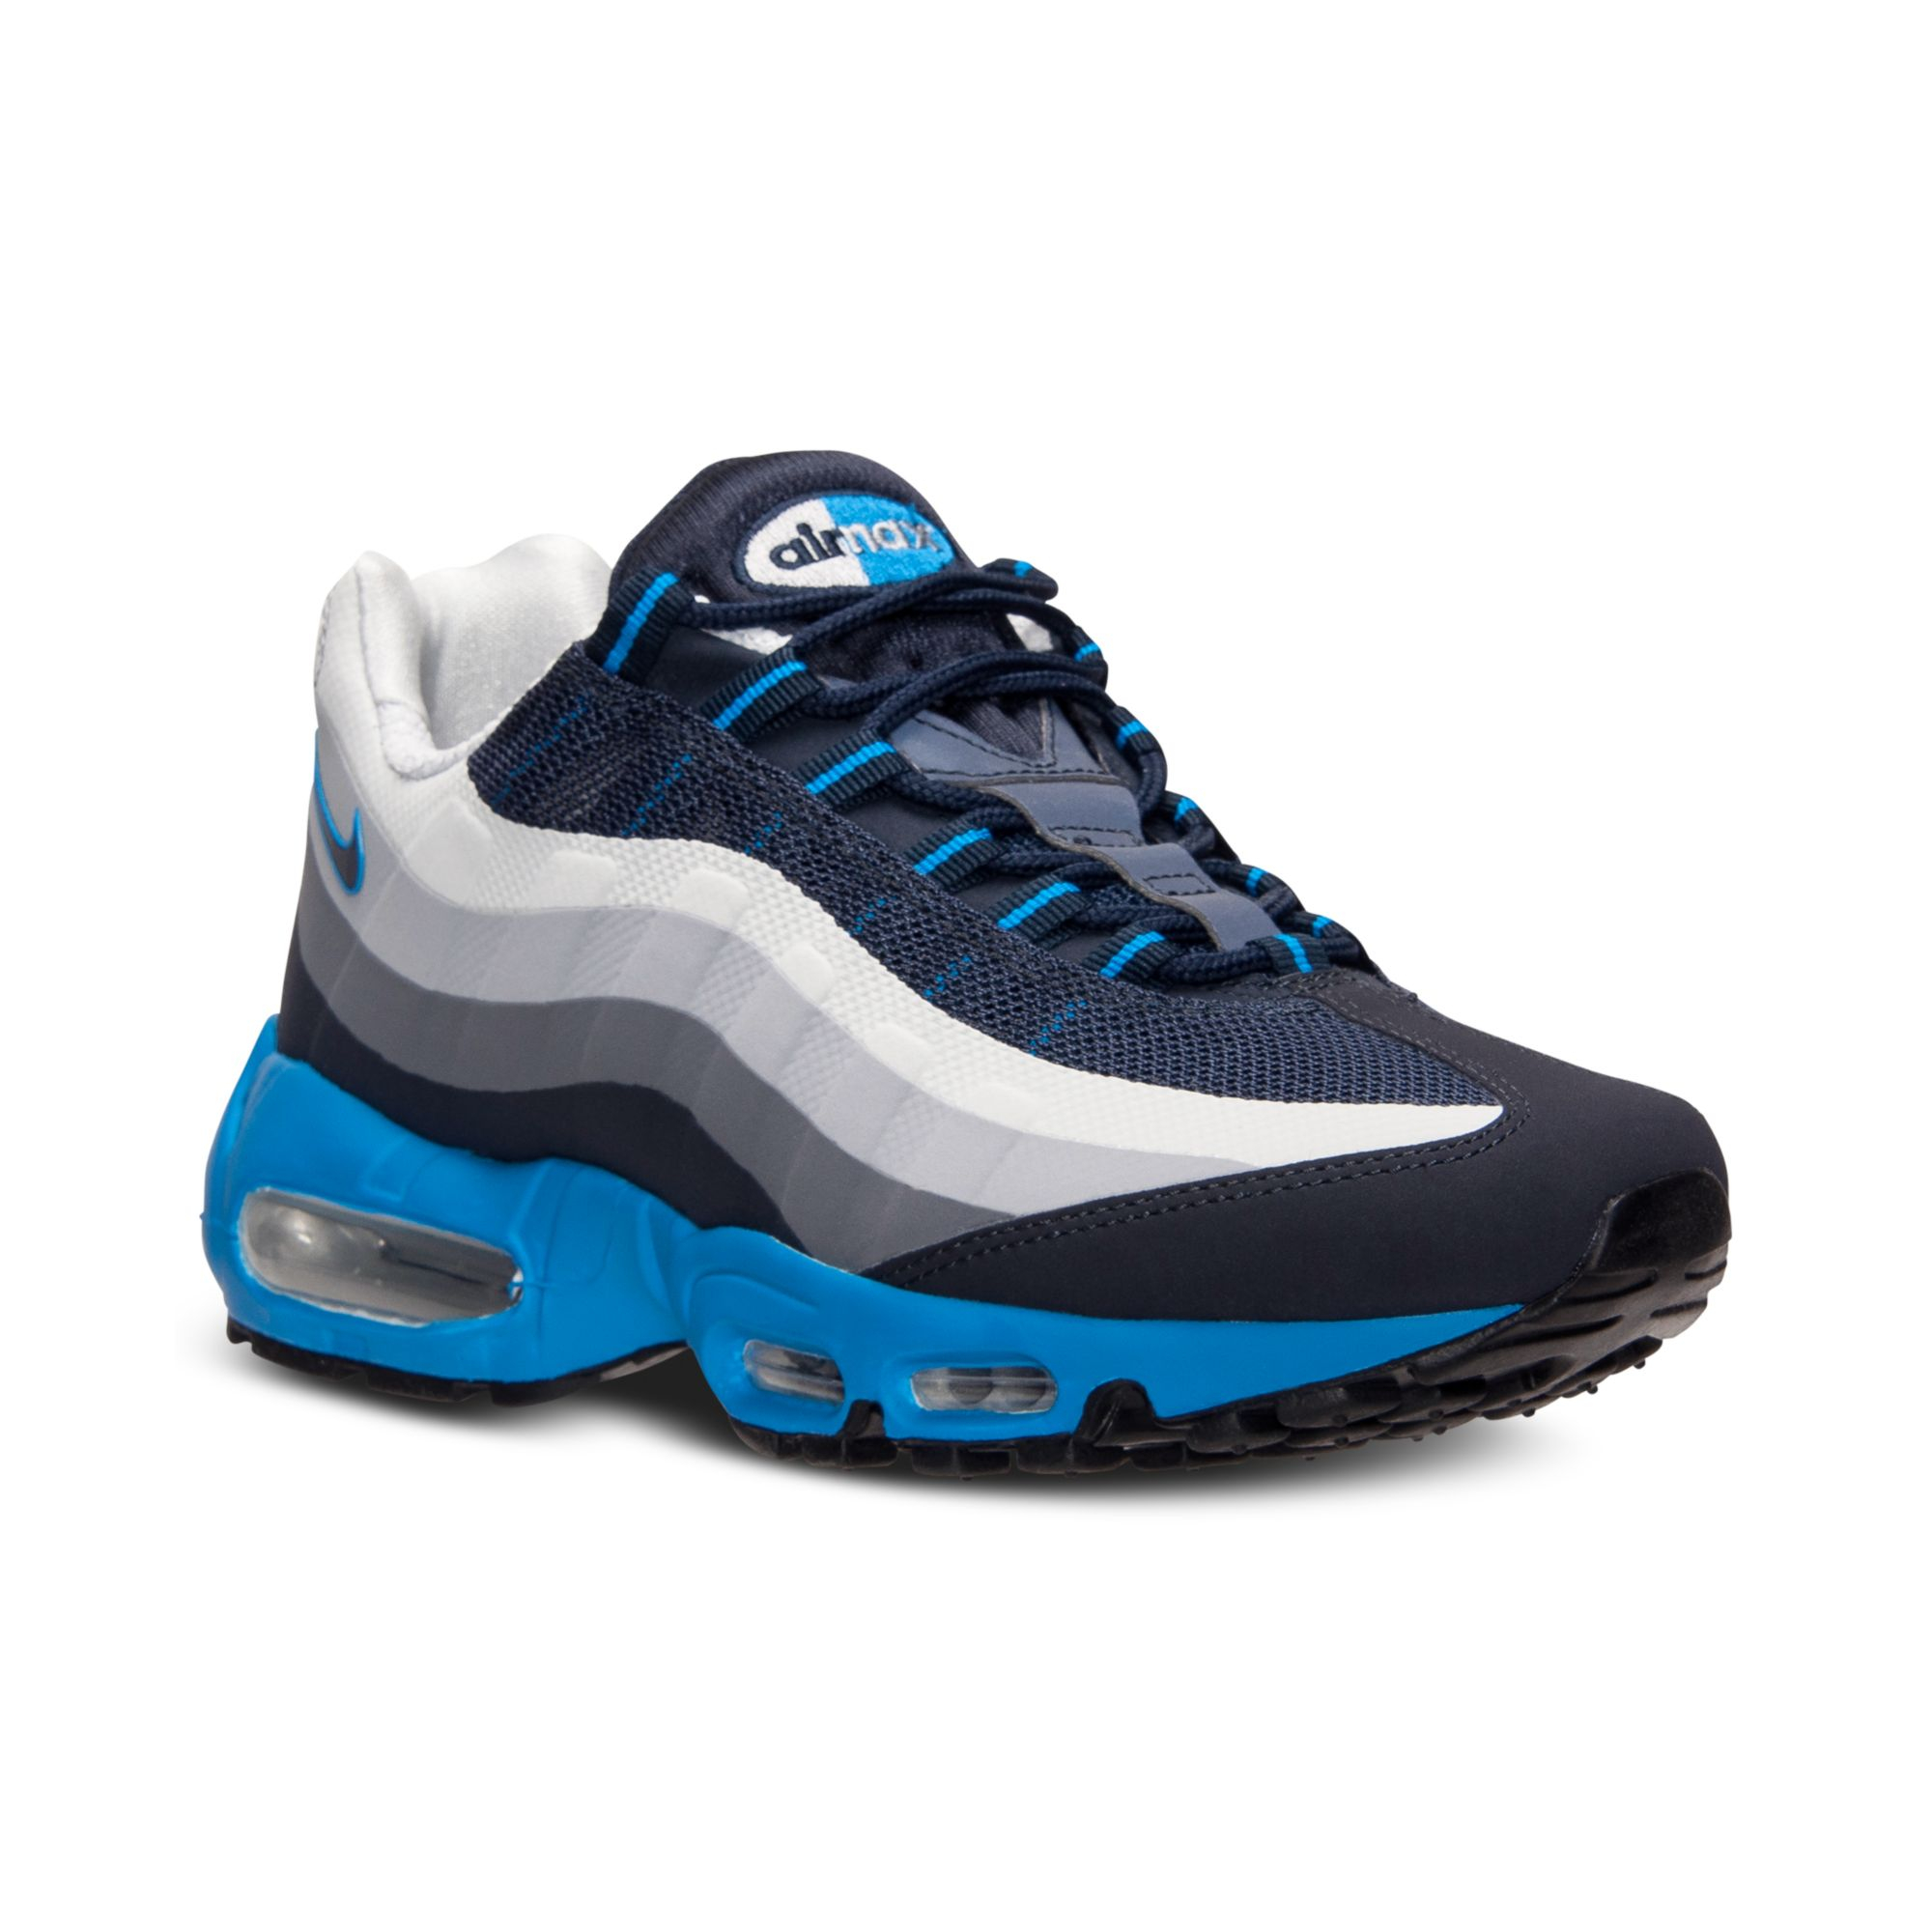 Lyst - Nike Mens Air Max 95 Nosew Running Sneakers From Finish Line in Blue for Men